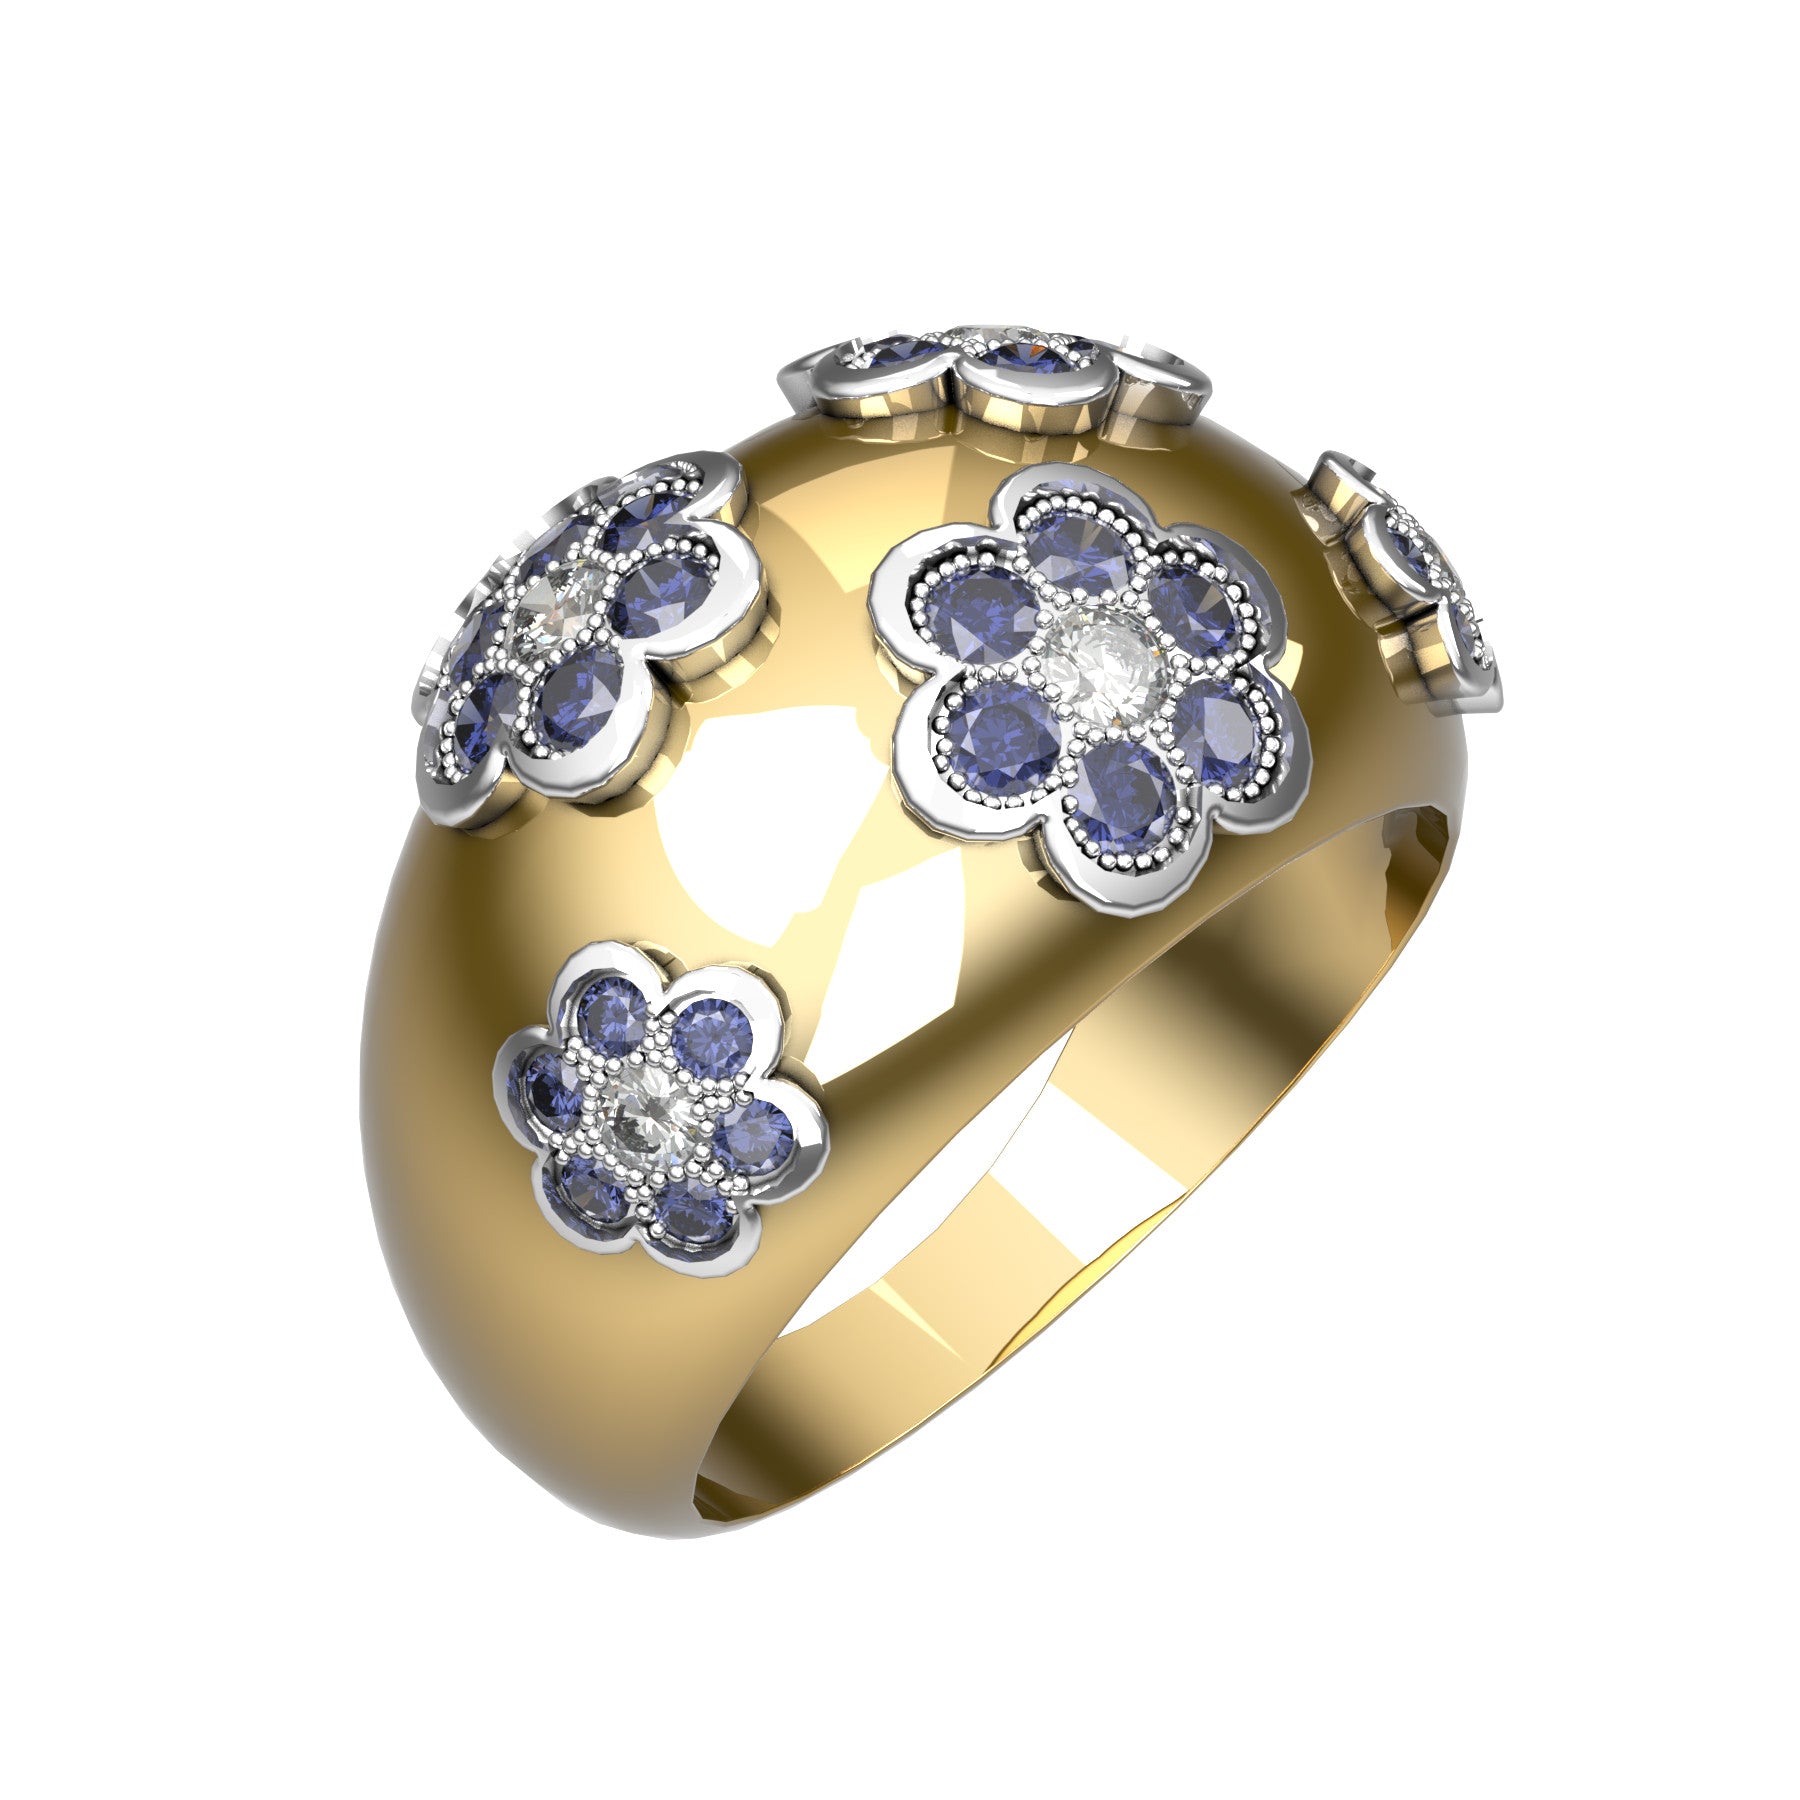 Blooming band ring, natural round diamonds, natural round sapphires, 18 k yellow and white gold, weight about 7,00 g (0.25 oz), width 12 mm max